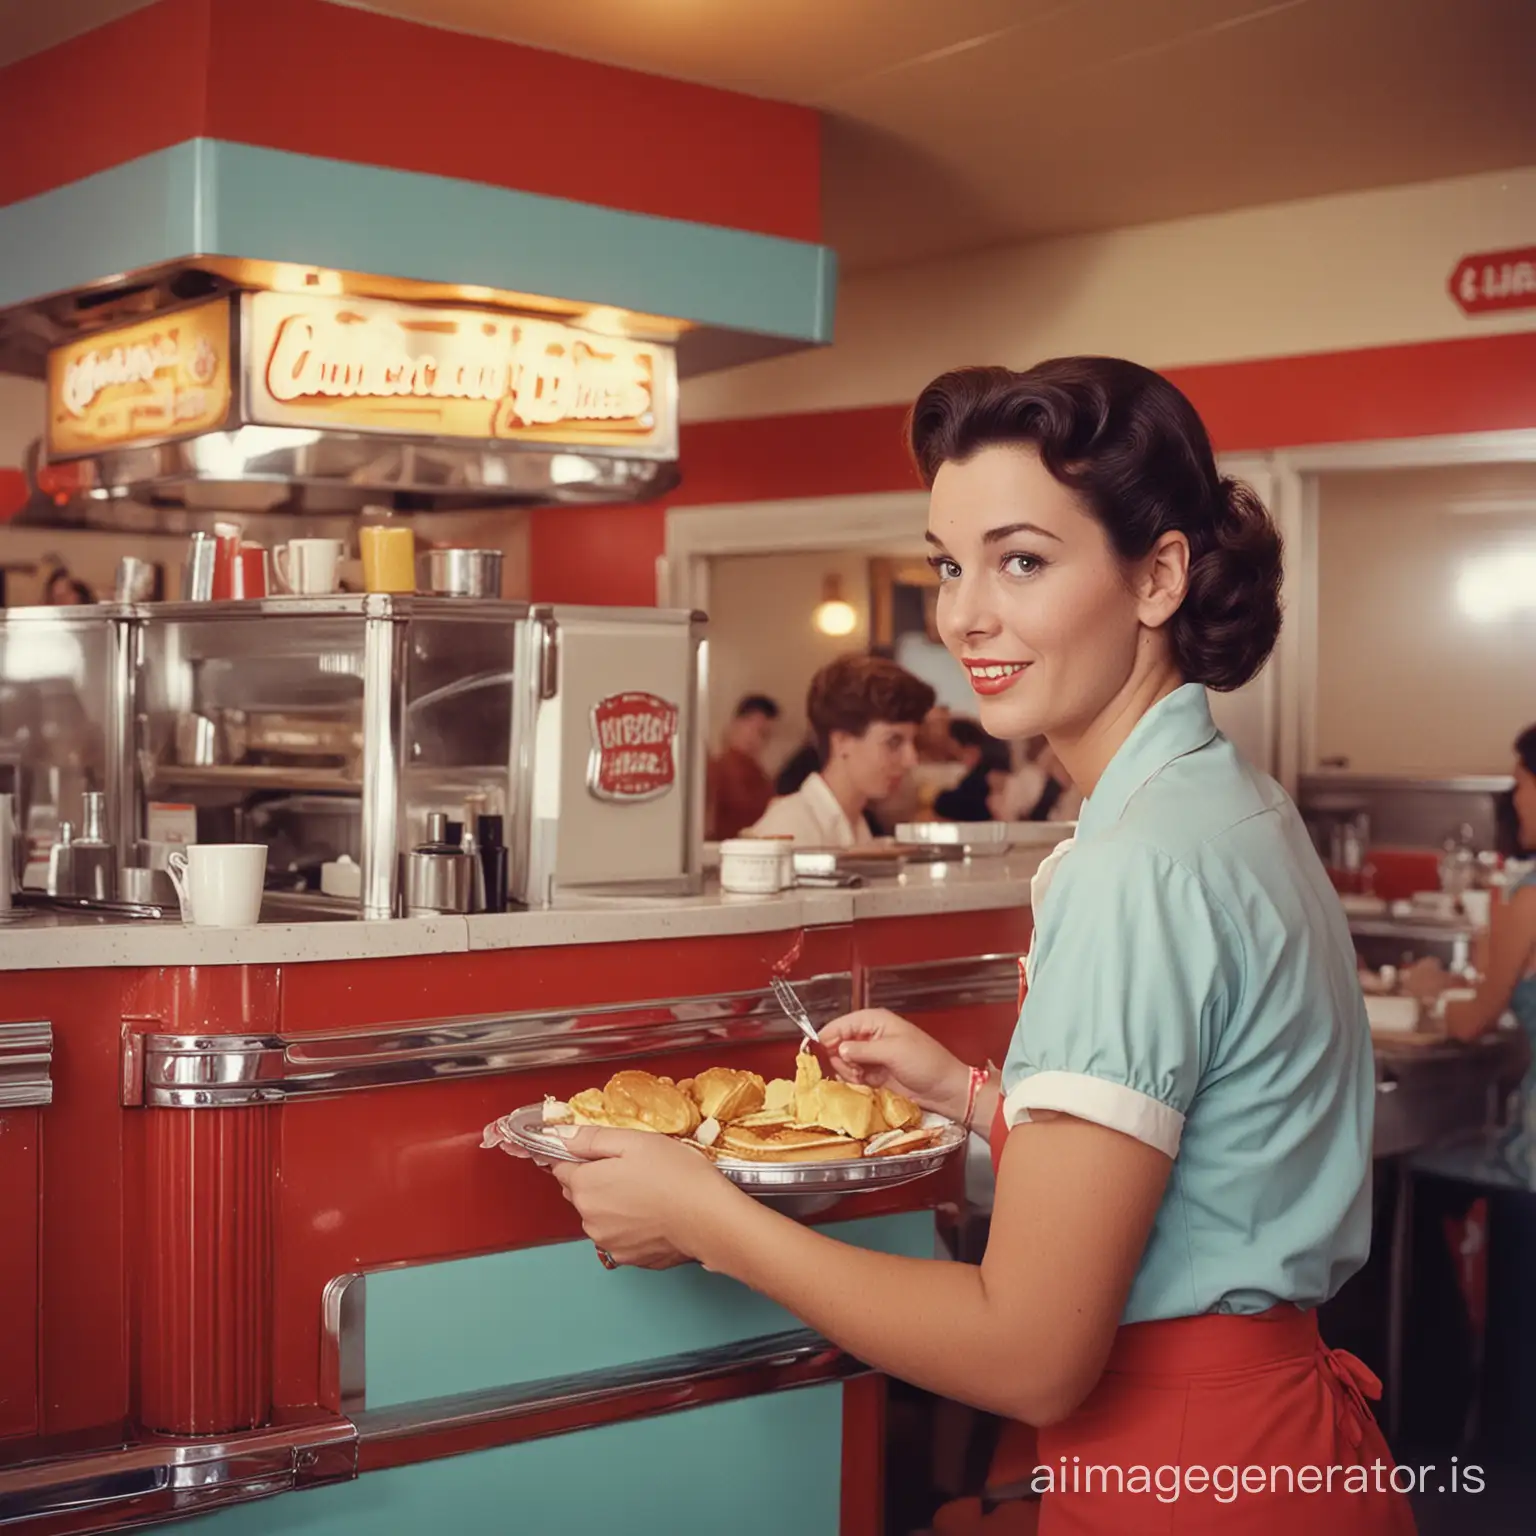 1950s-American-Diner-Employee-Serving-Colorful-Dishes-Retro-Kodachrome-Scene